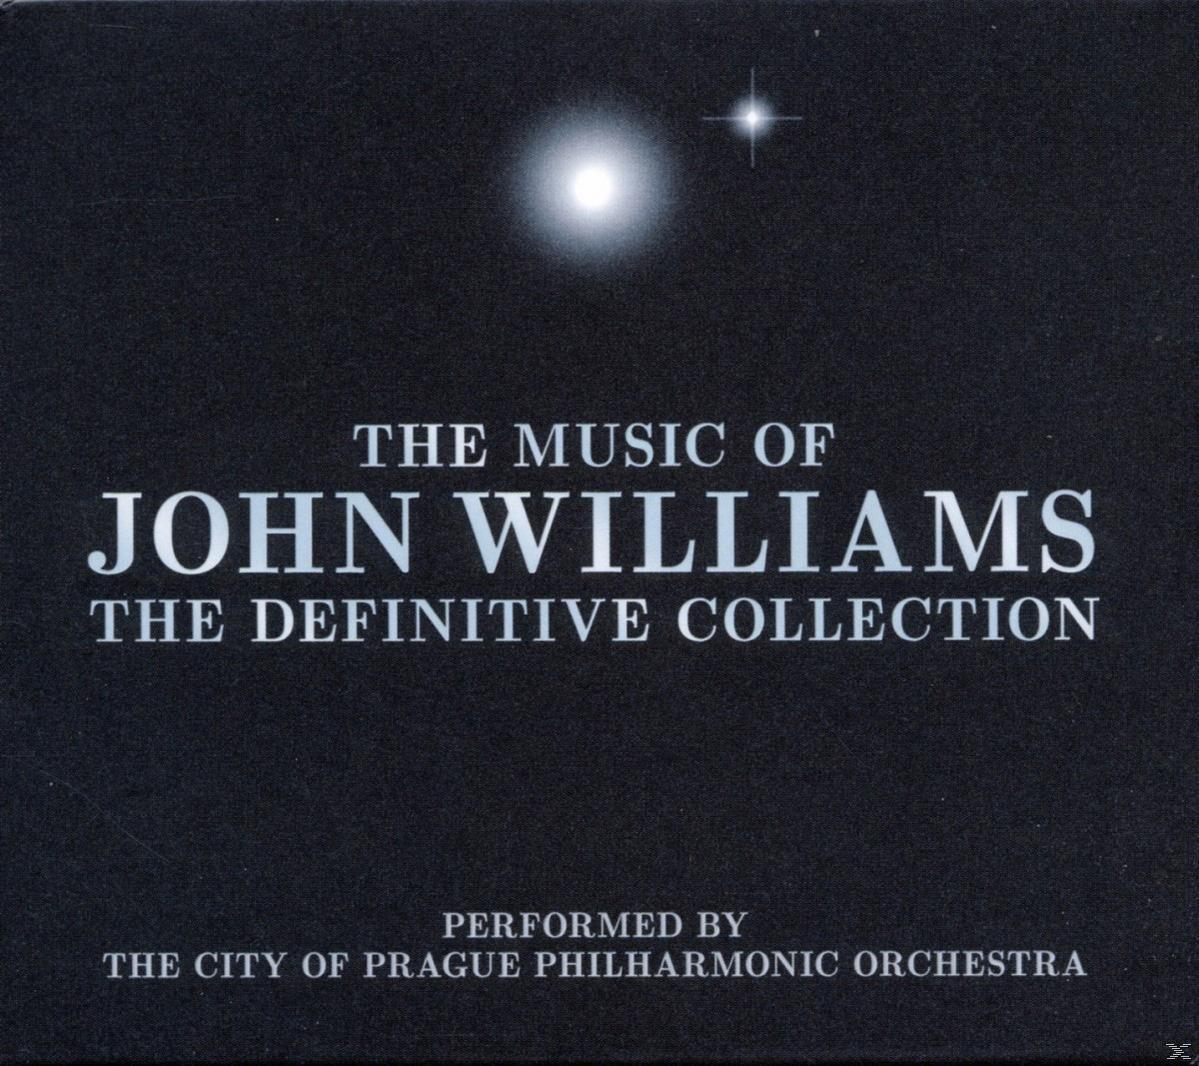 N.Y. The - Music Works, Music Prague Of (CD) Williams The Philharmonic Jazz The Collection - Orchestra Of Definitive - City John Orchestra, London